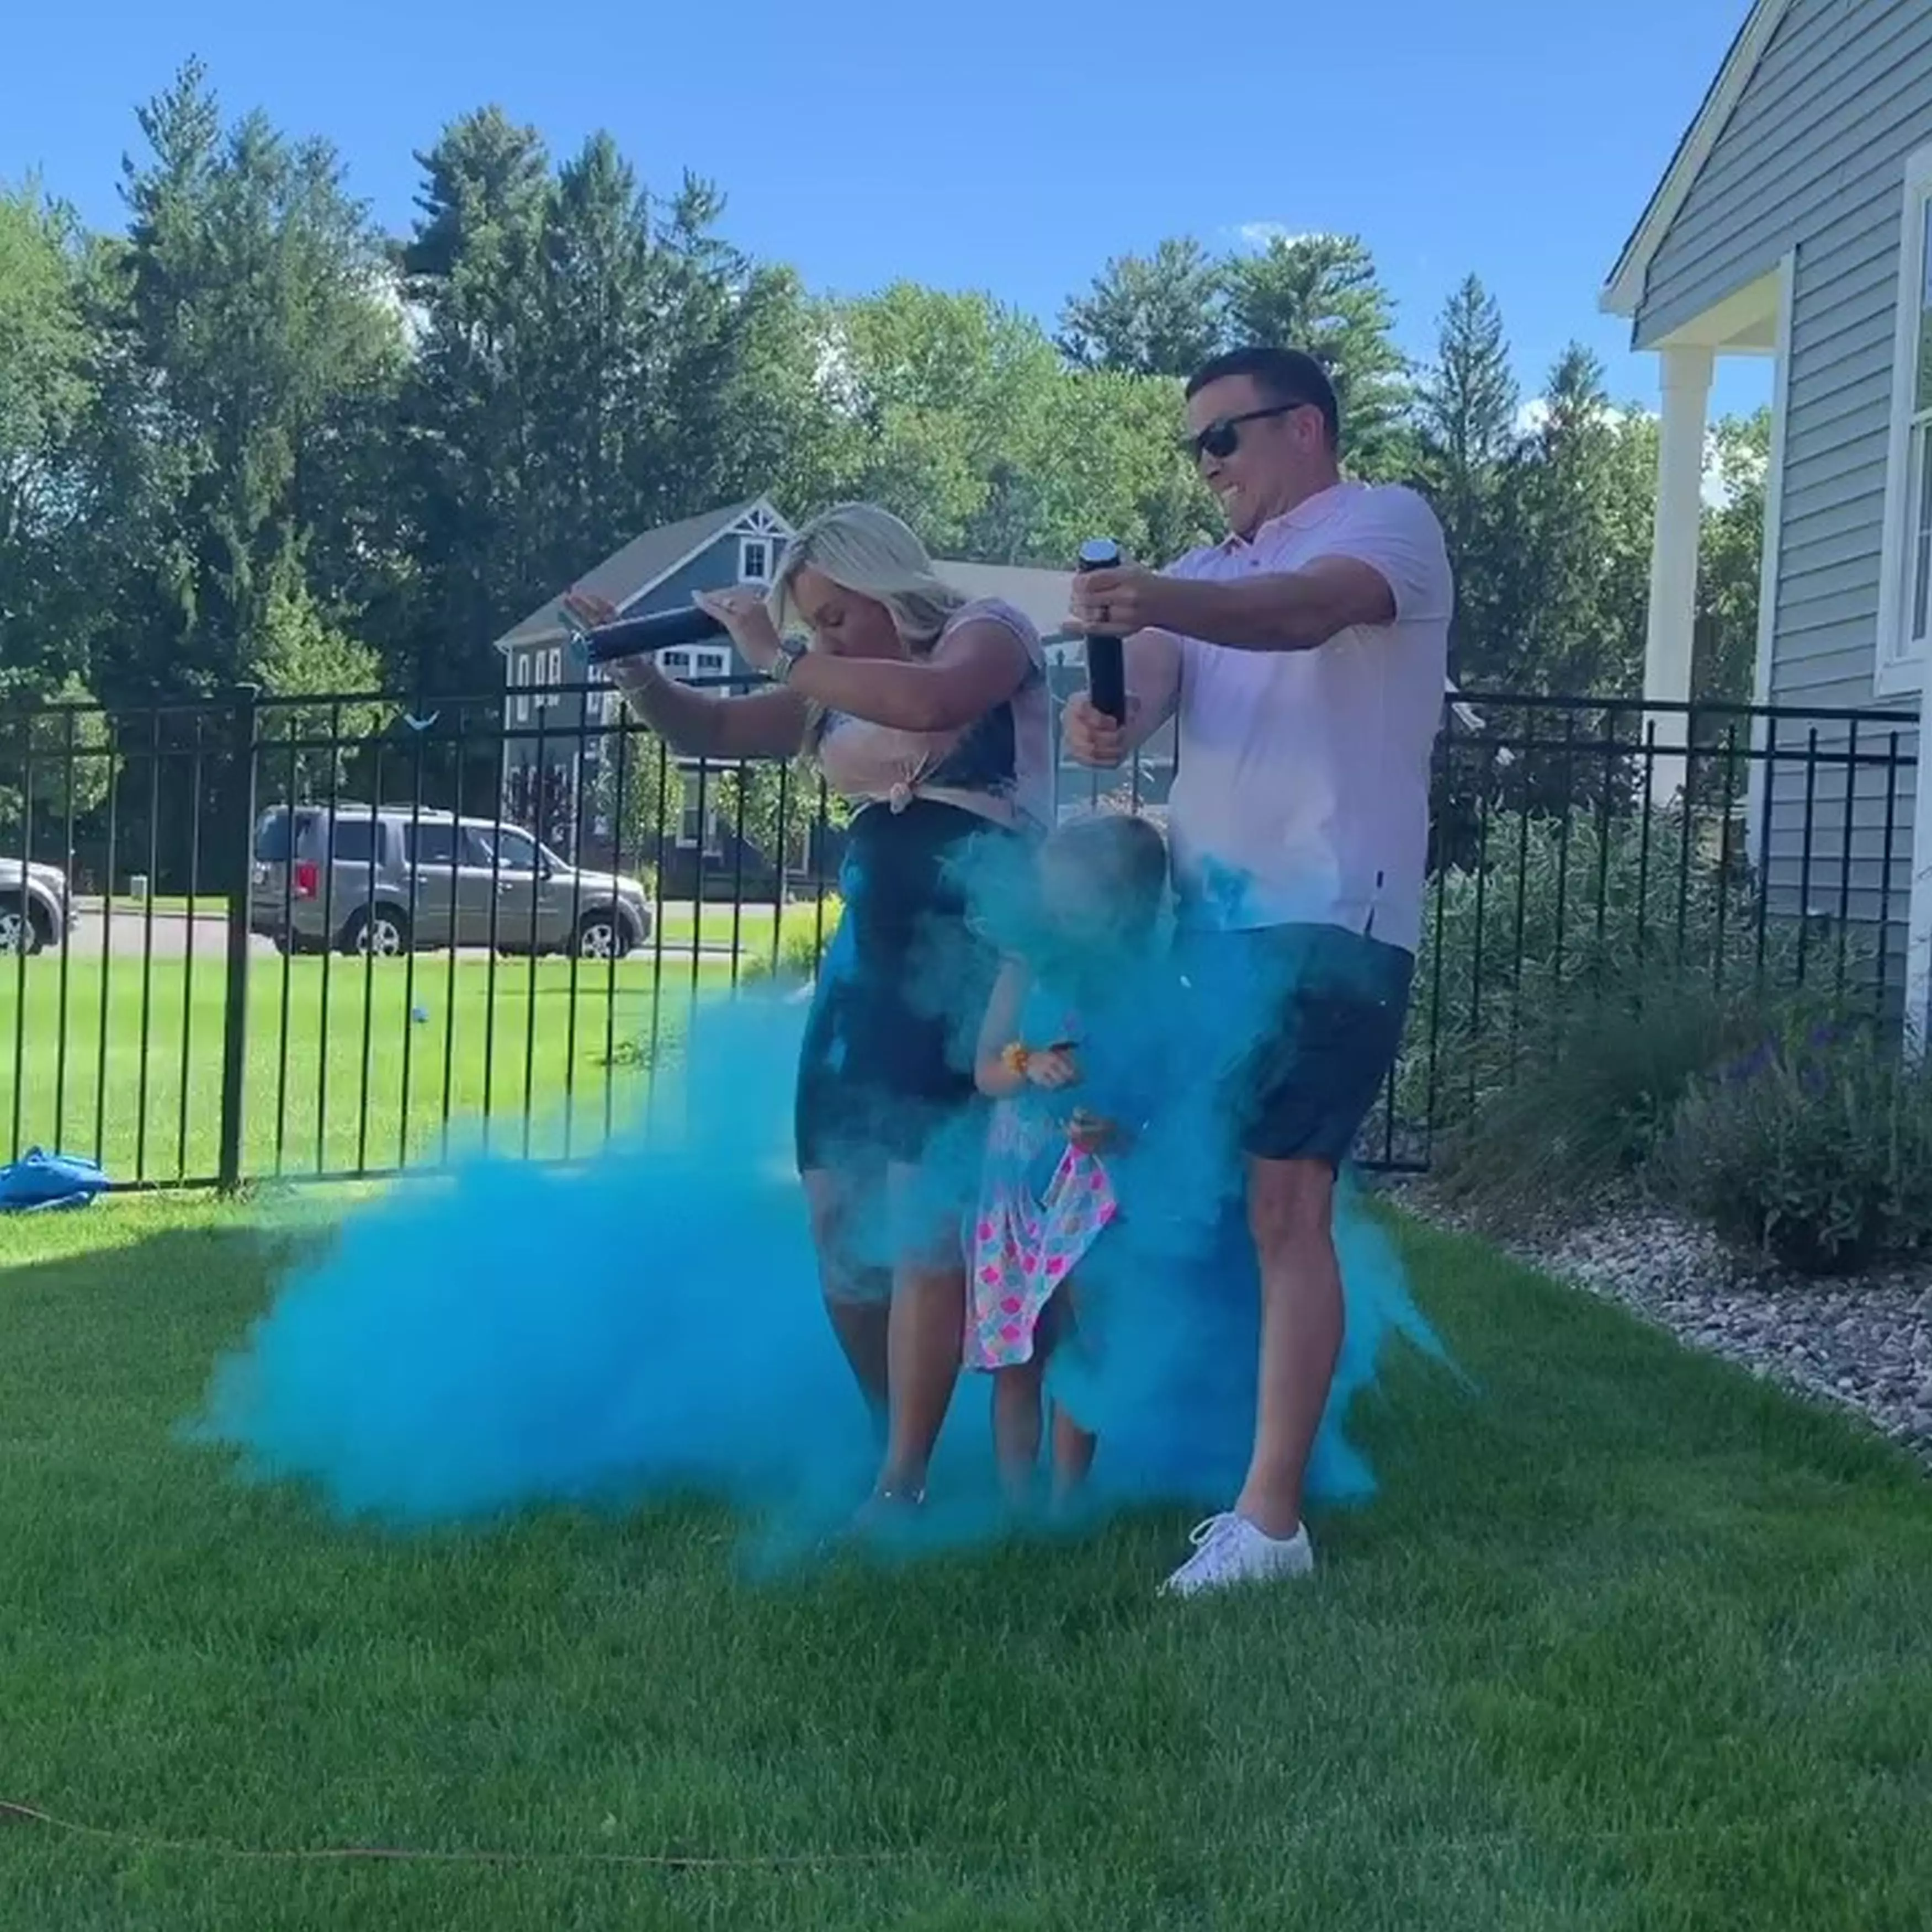 Kristin and Tom's gender reveal didn't quite go according to plan.